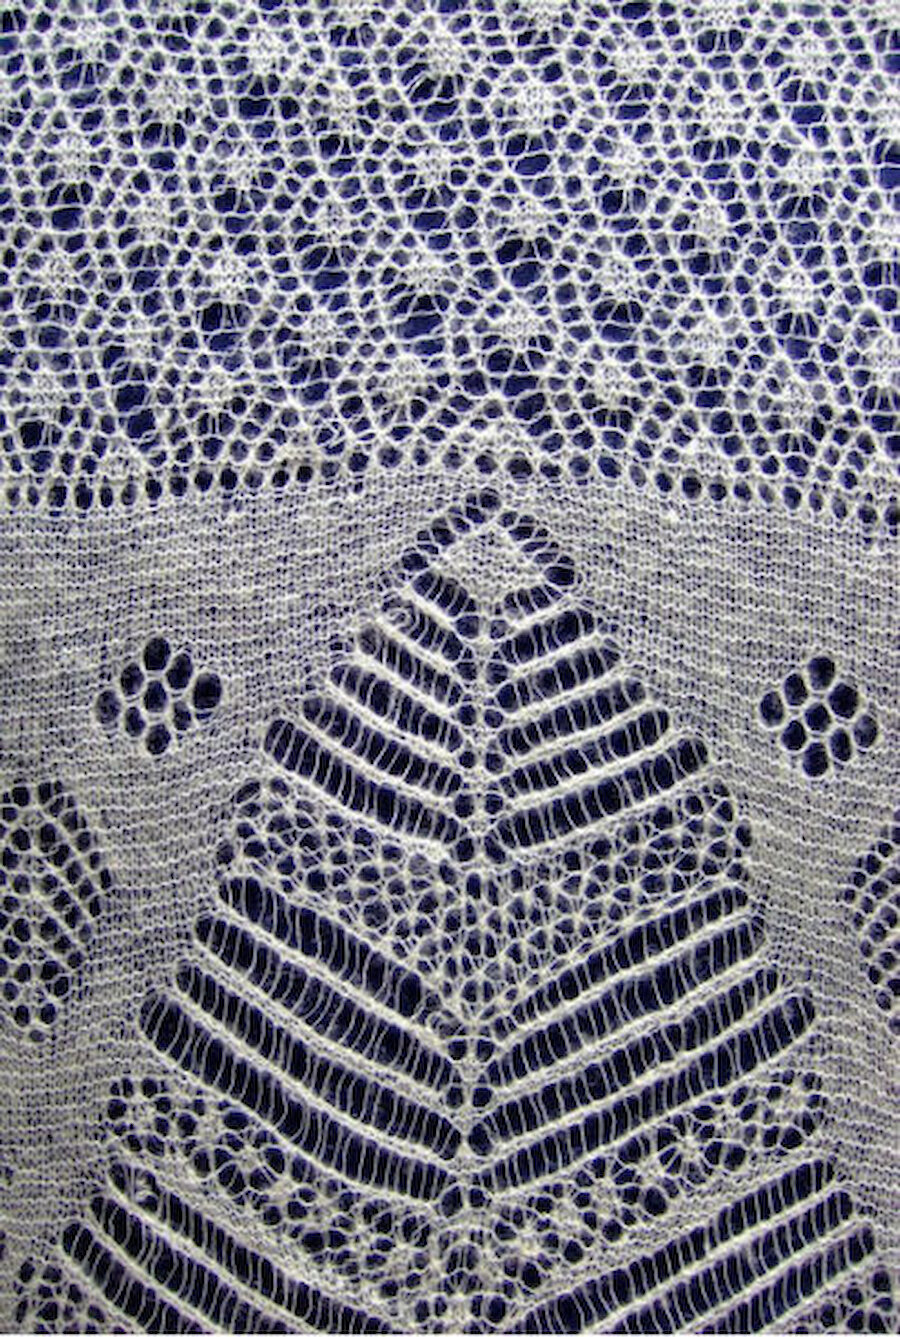 An example of fine Shetland lace from the collection. (Courtesy: Shetland Amenity Trust)